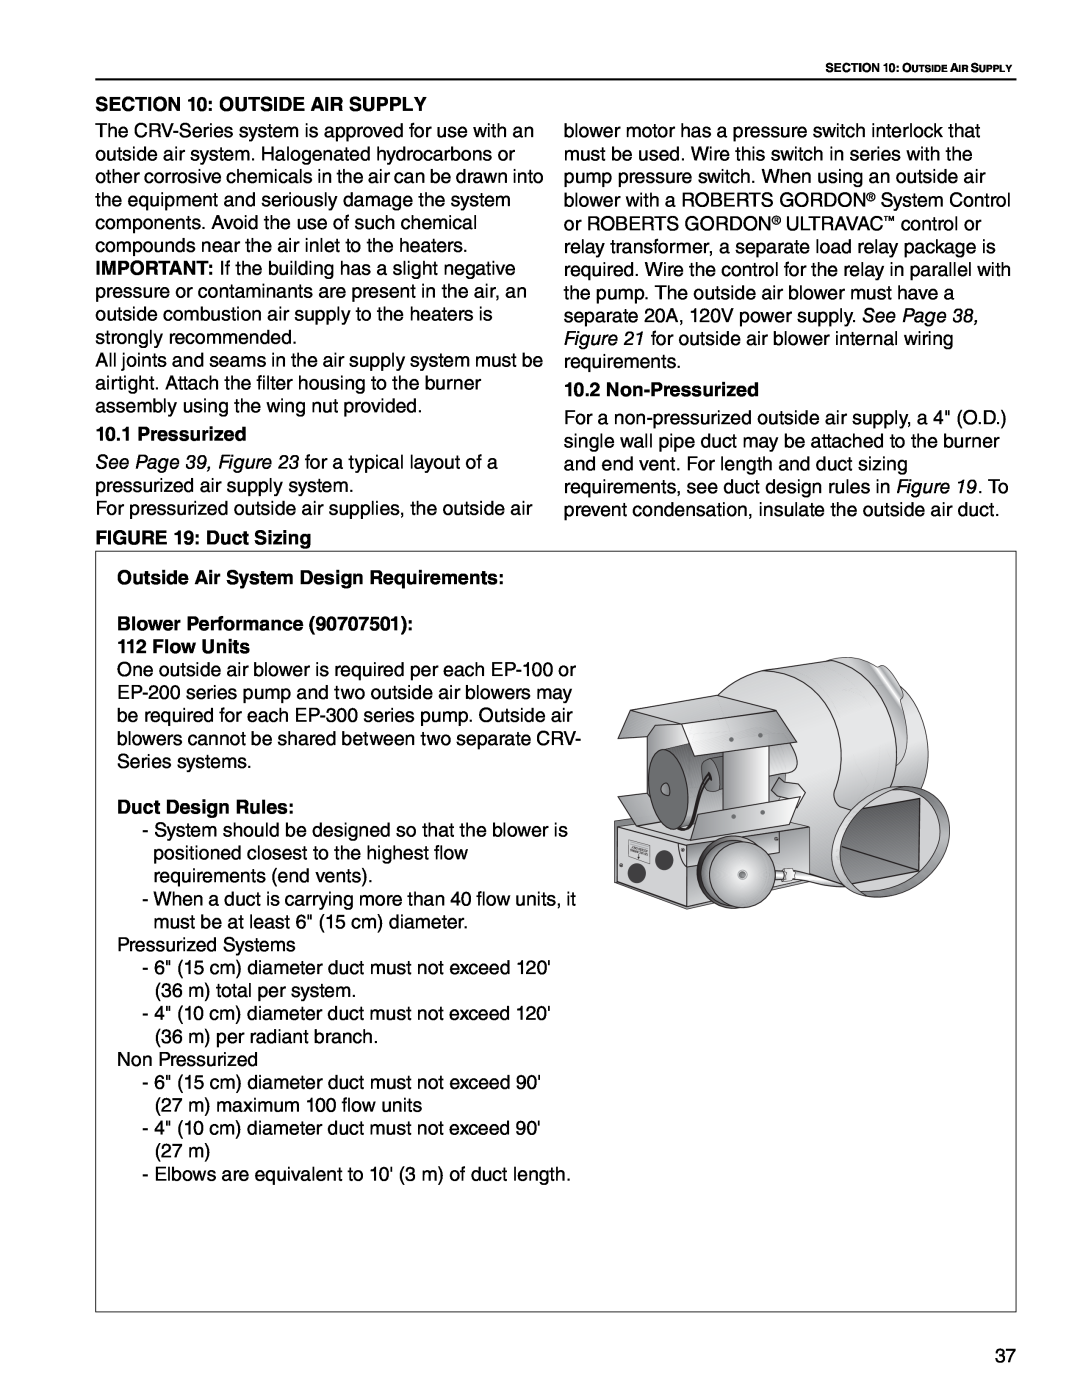 Roberts Gorden CRV-B-6, CRV-B-8 Outside Air Supply, Non-Pressurized, Duct Sizing, Outside Air System Design Requirements 